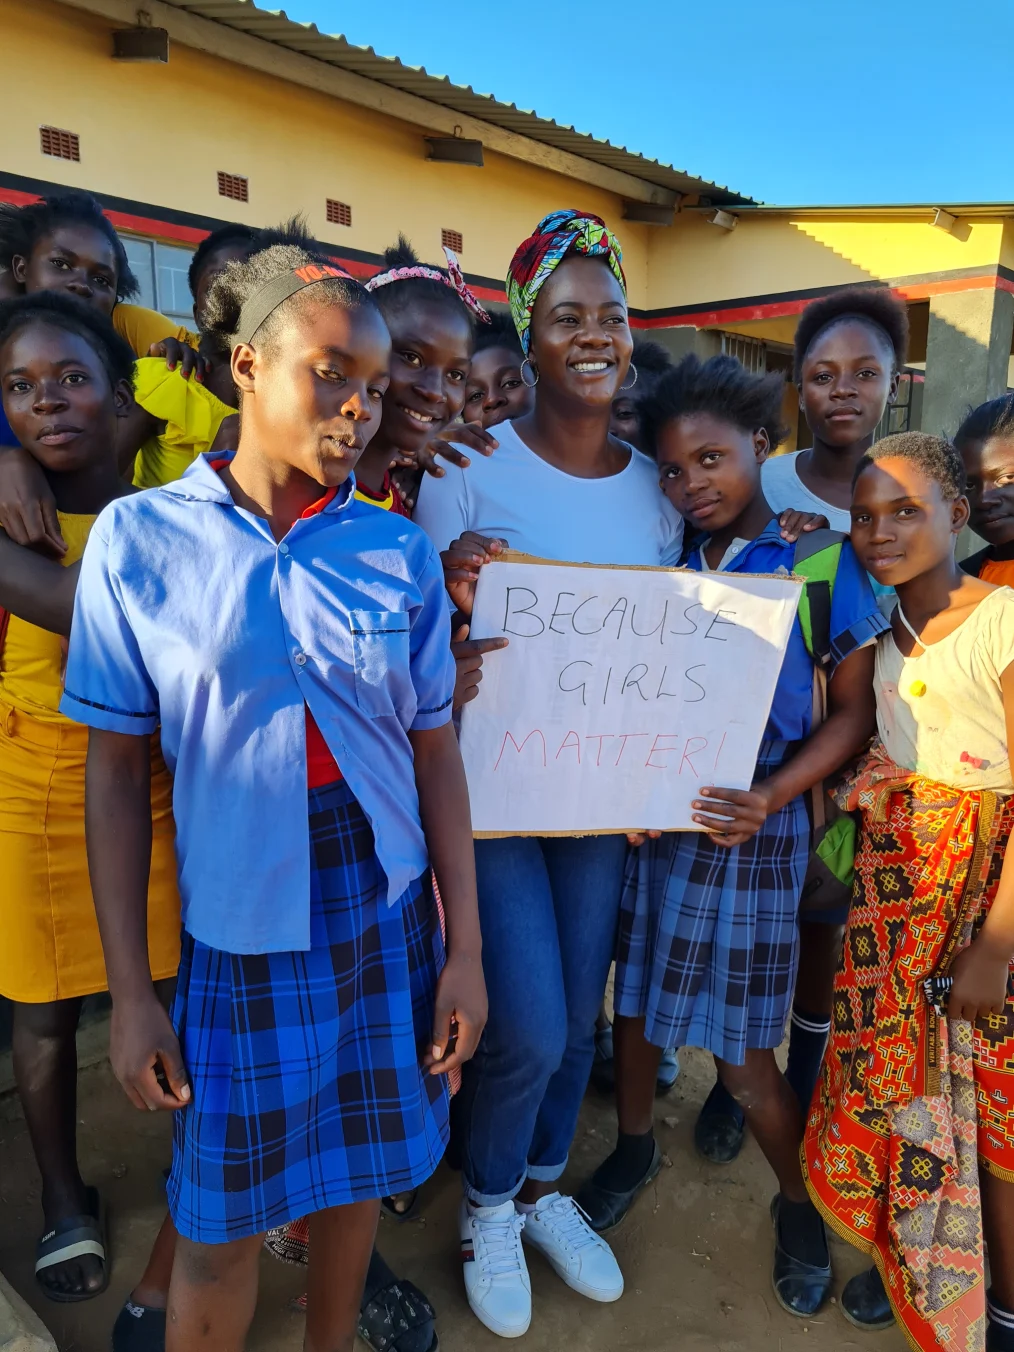 Ireen Chikatula poses for a photo with 11 teenage students. They have a deep skin tone and some are wearing school uniforms. Ireen Chikatula holds a sign that reads, “Because girls matter!”